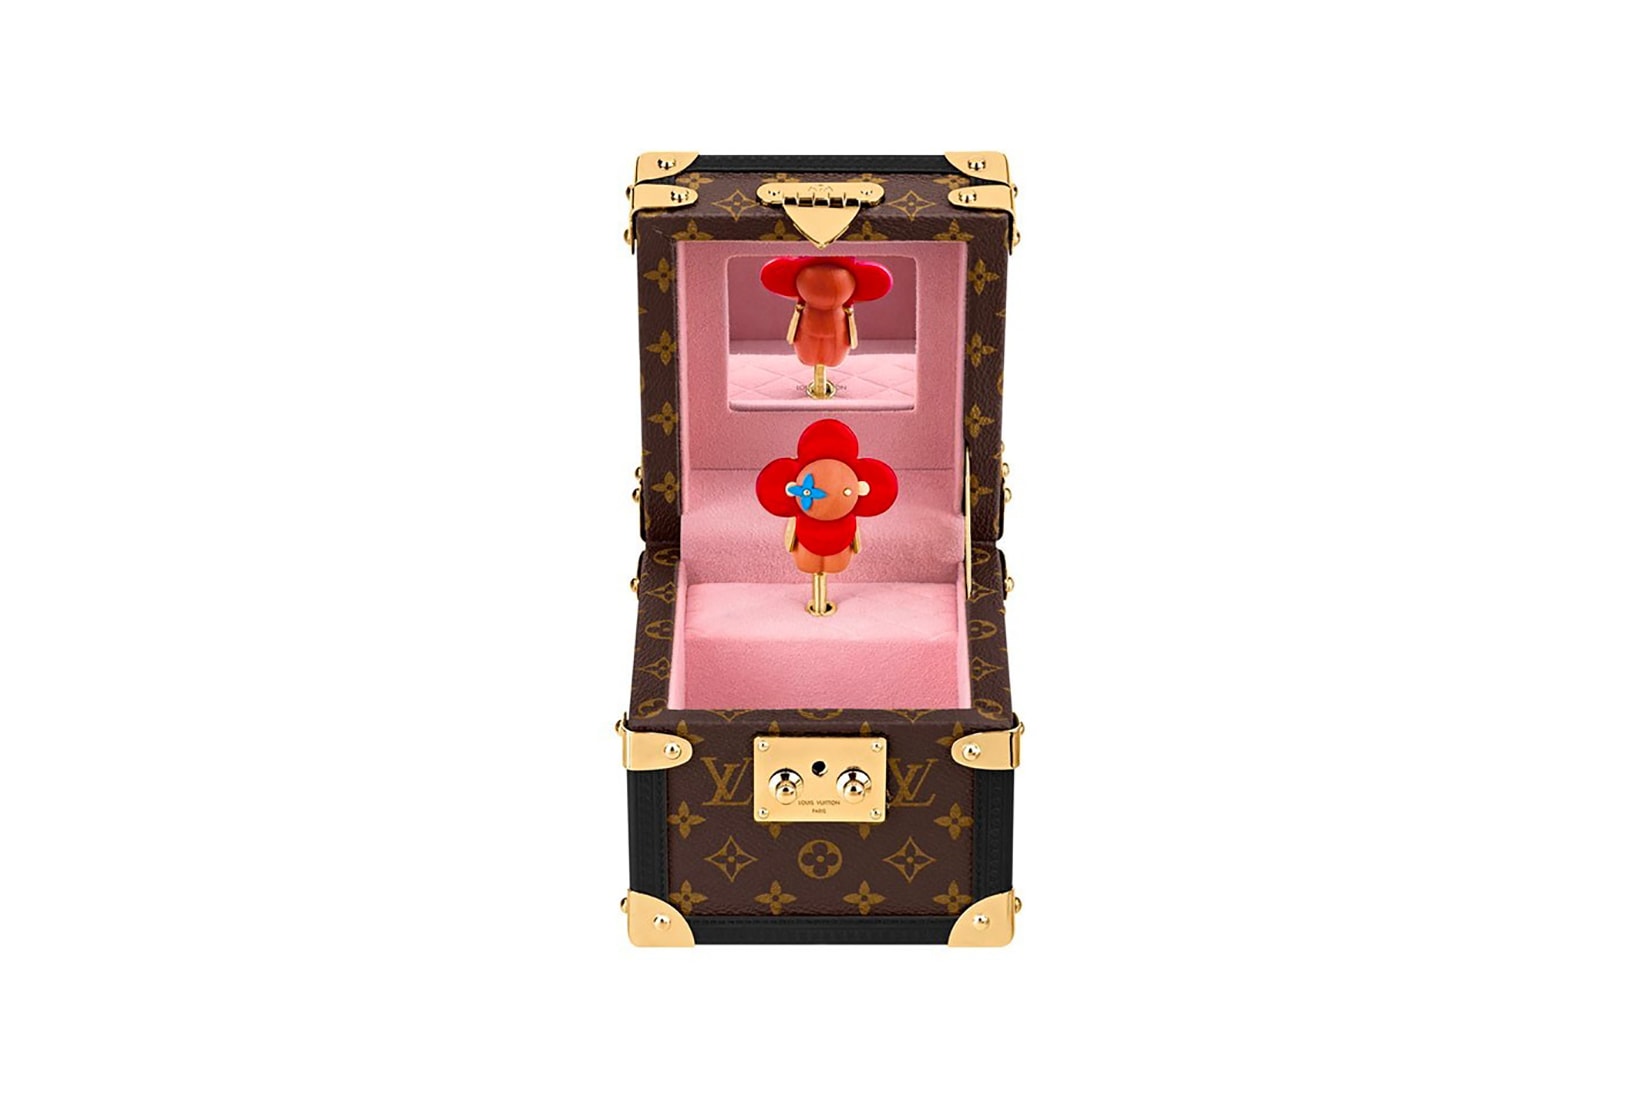 louis vuitton home goods collection games toys accessories decor homeware cards jenga